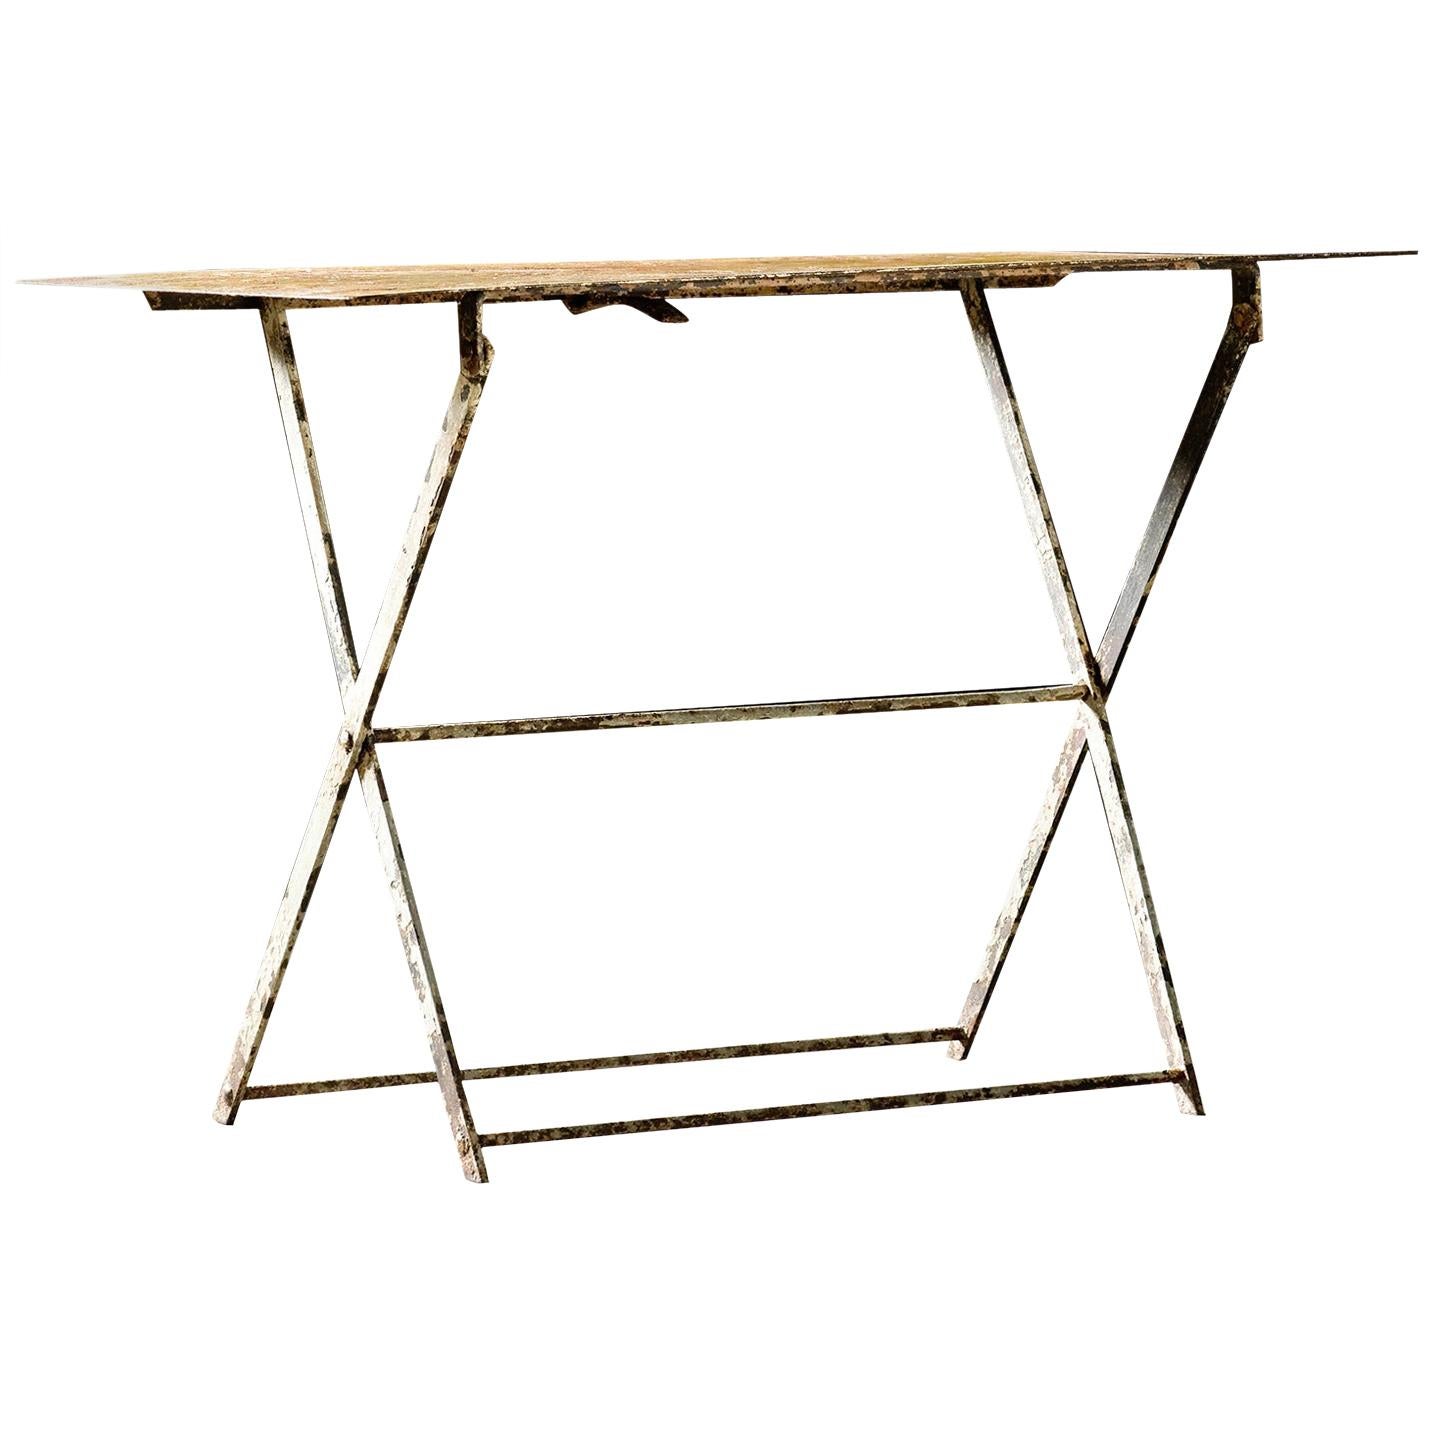 Early 20th Century French Iron Folding Garden Table